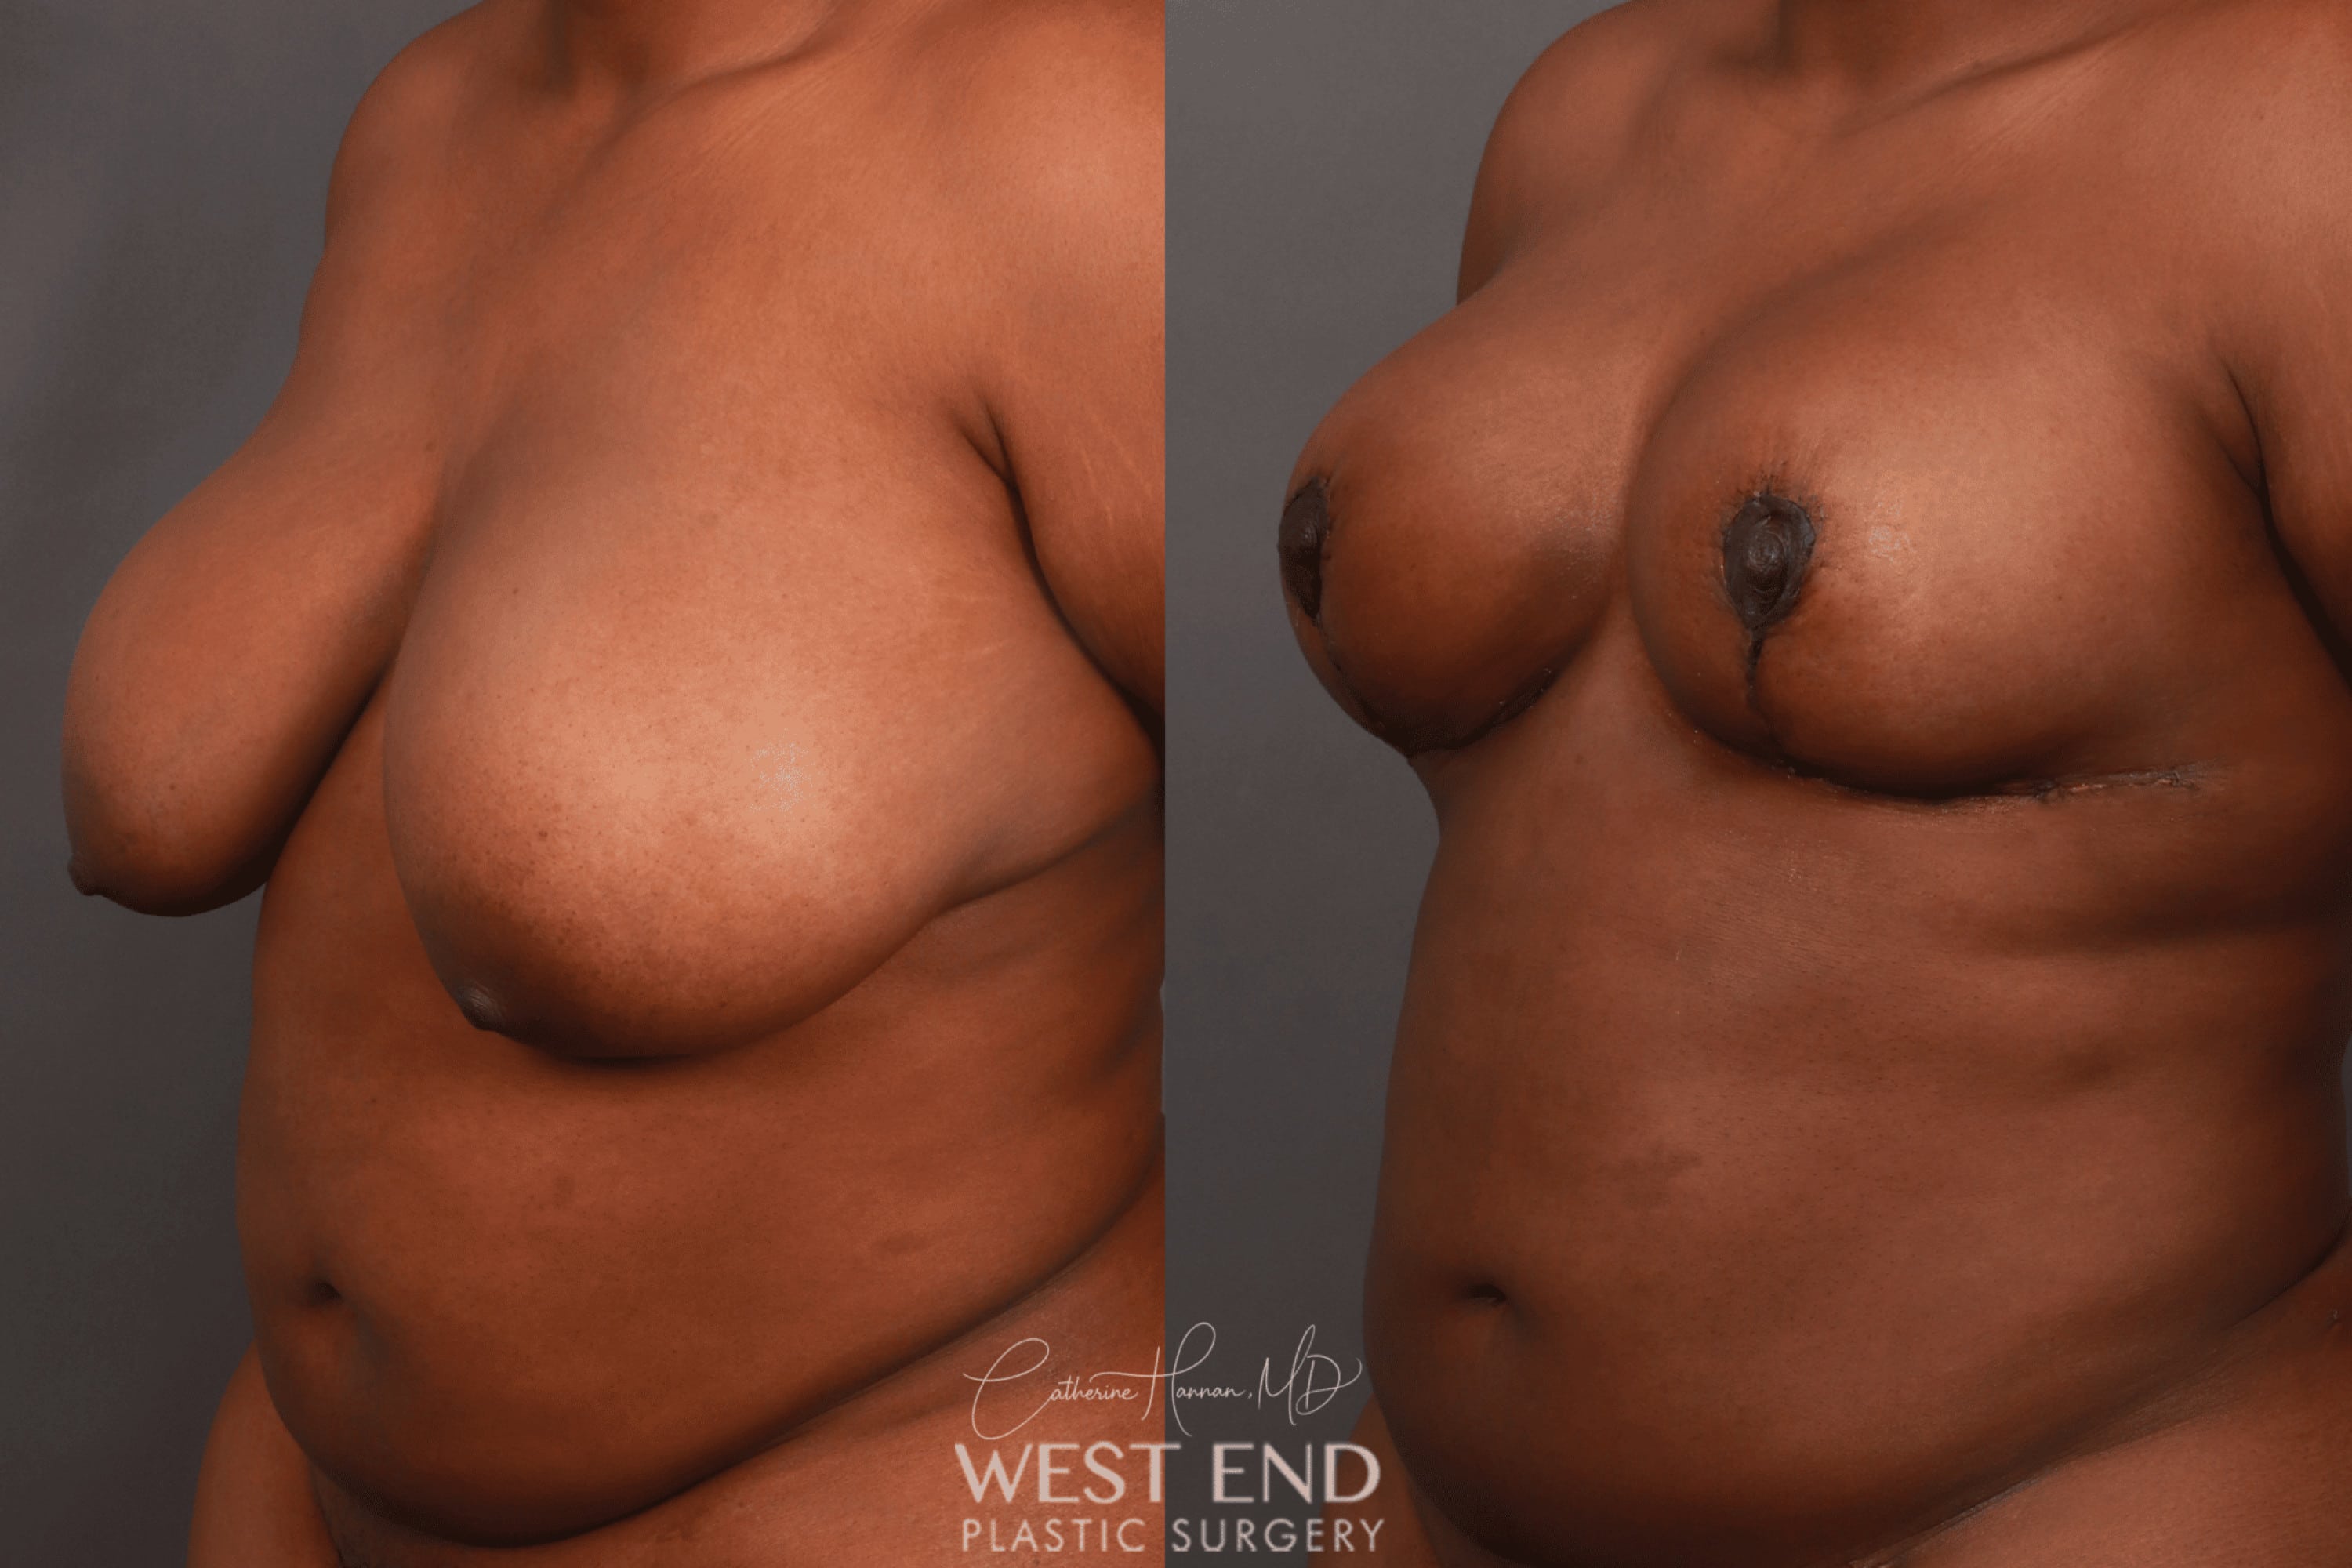 Breast Reduction (5 Days Post-Op)